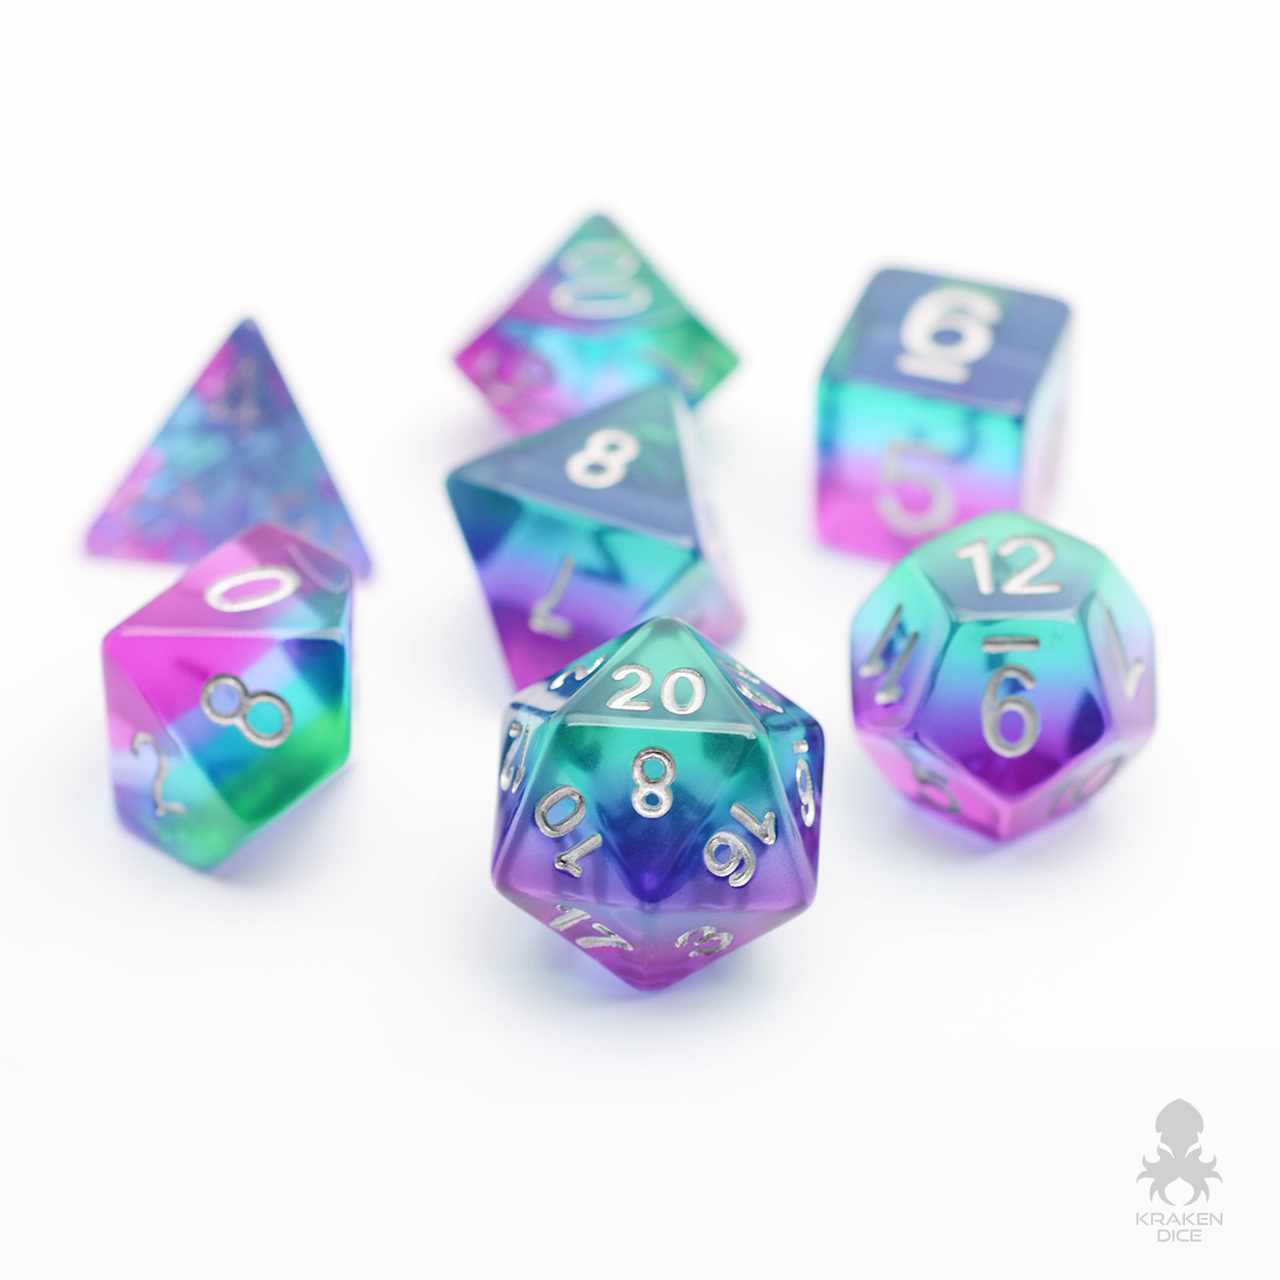 DND dice that are pink, blue and purple and semi-transparent.